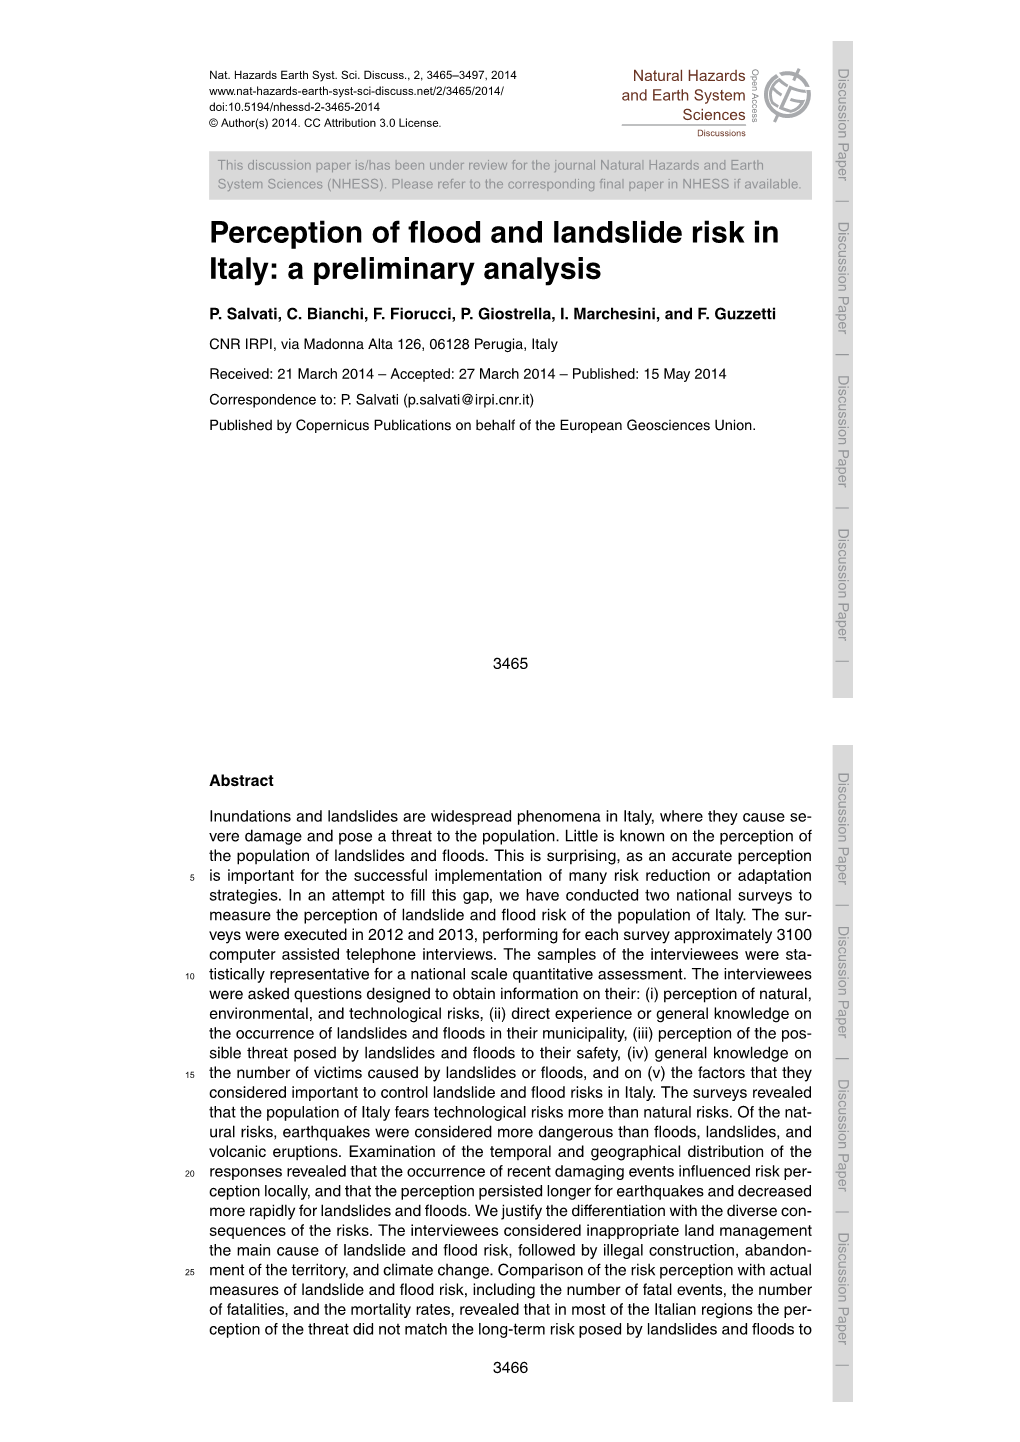 Perception of Flood and Landslide Risk in Italy: a Preliminary Analysis